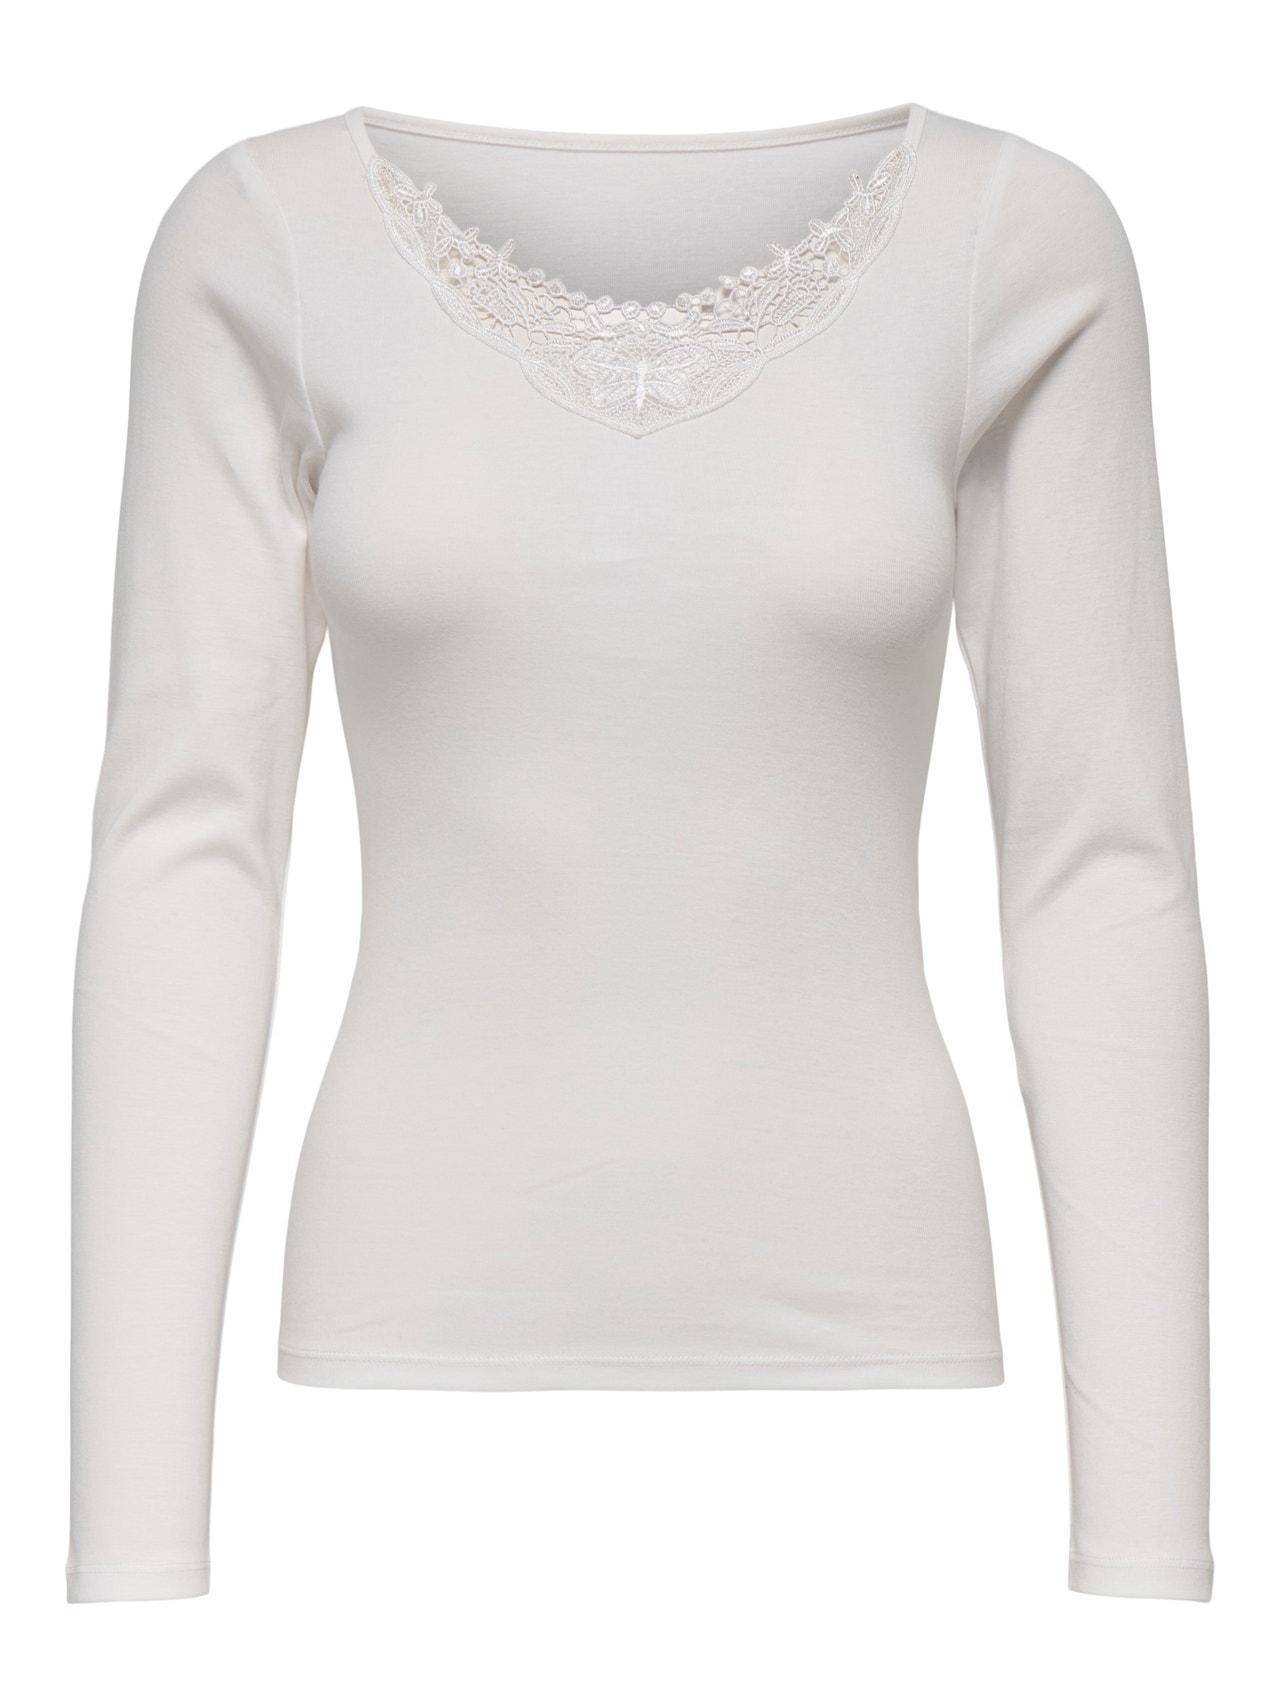 ONLY Long sleeved top with lace neck -Cloud Dancer - 15302894